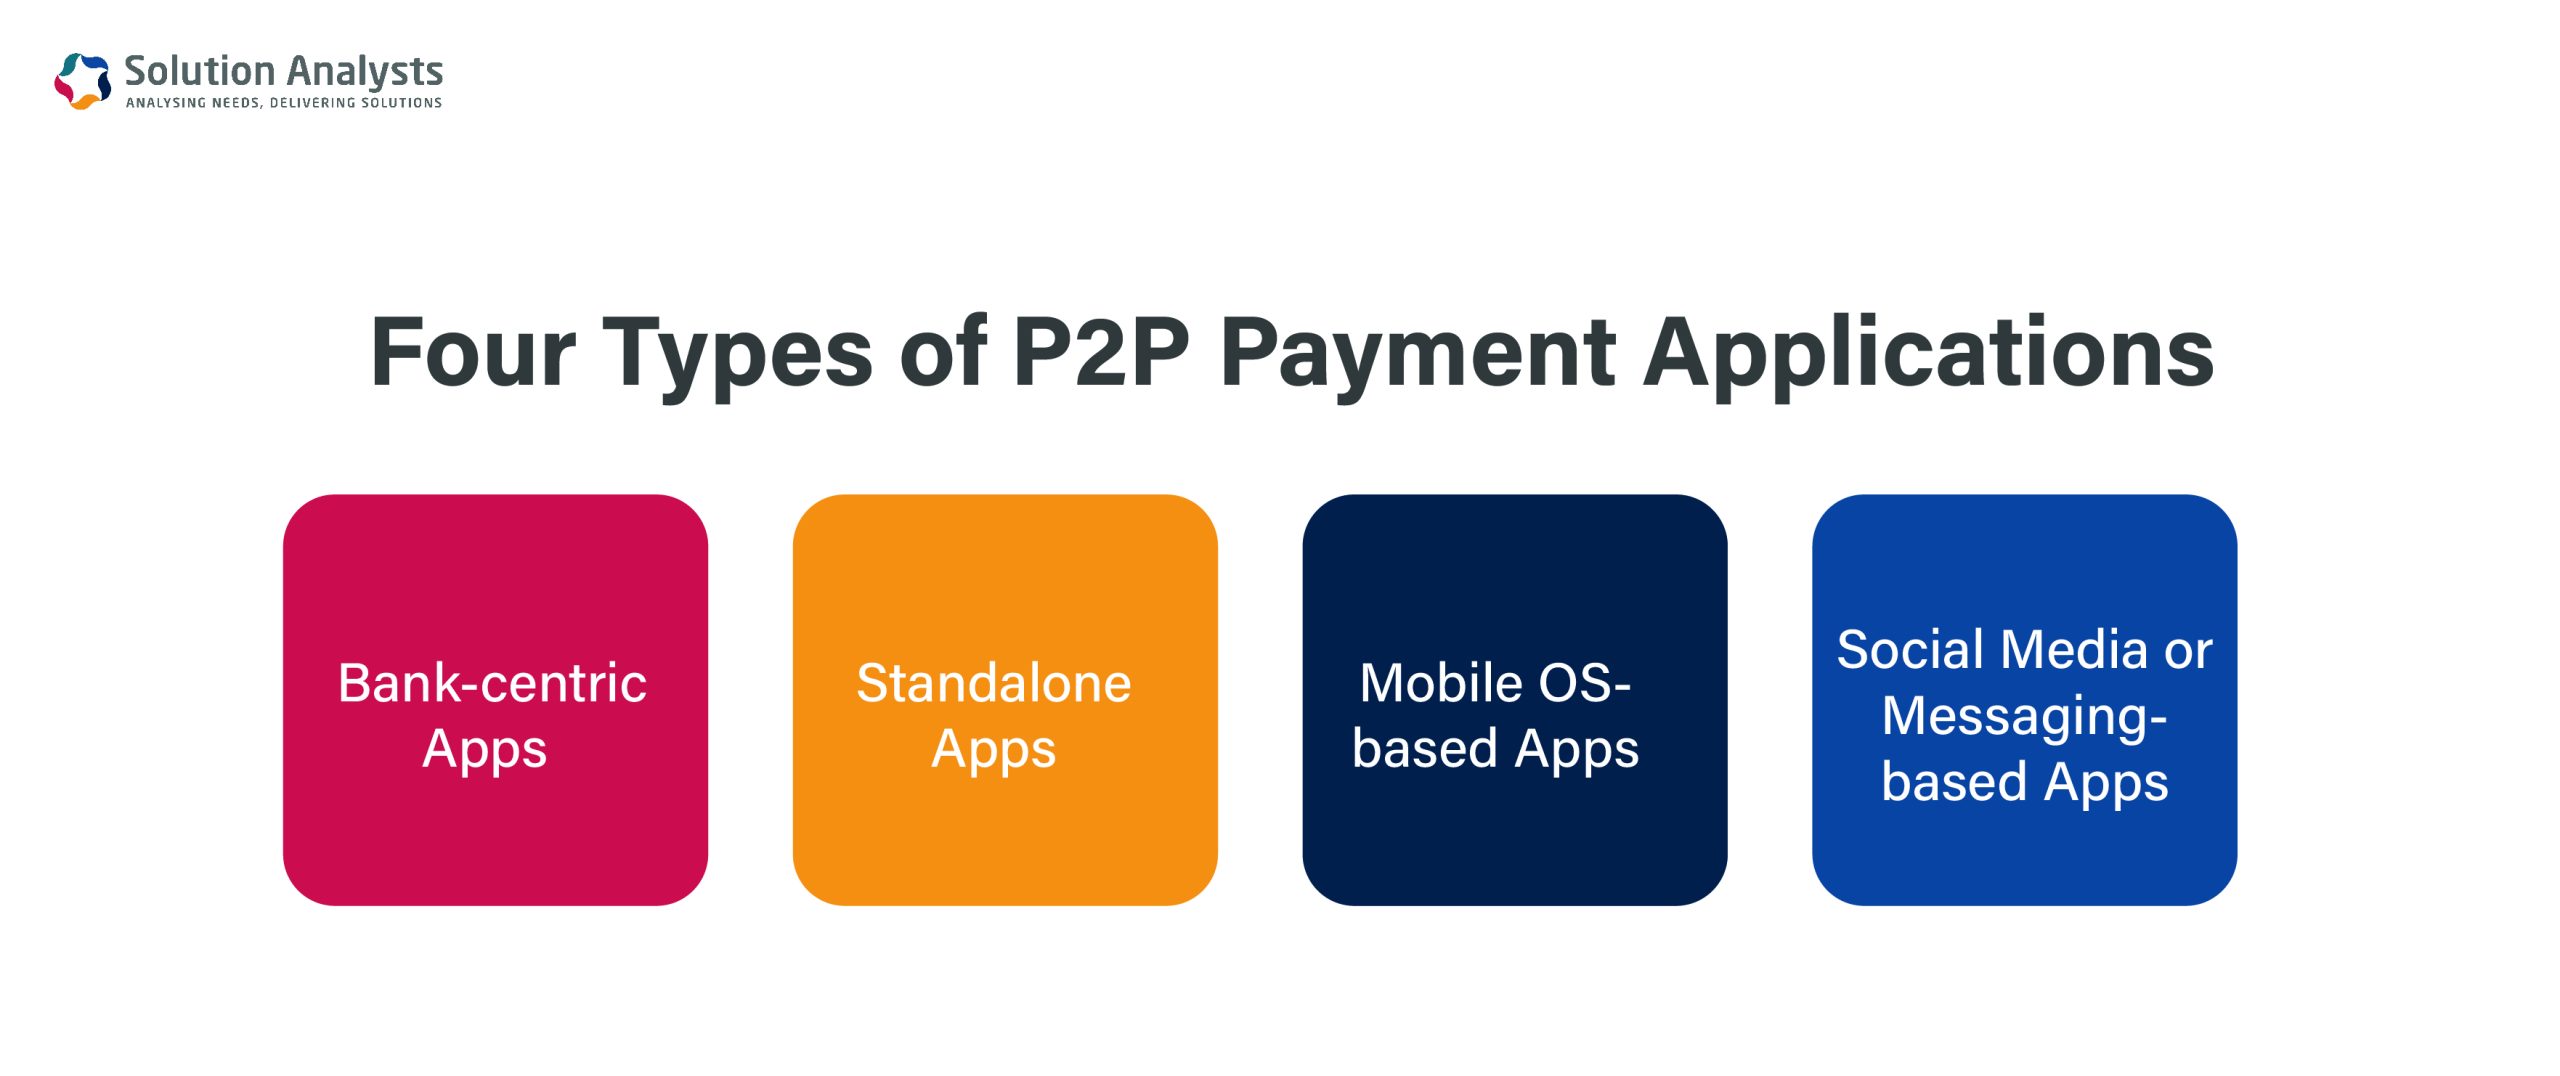 Types of P2P Payment Applications